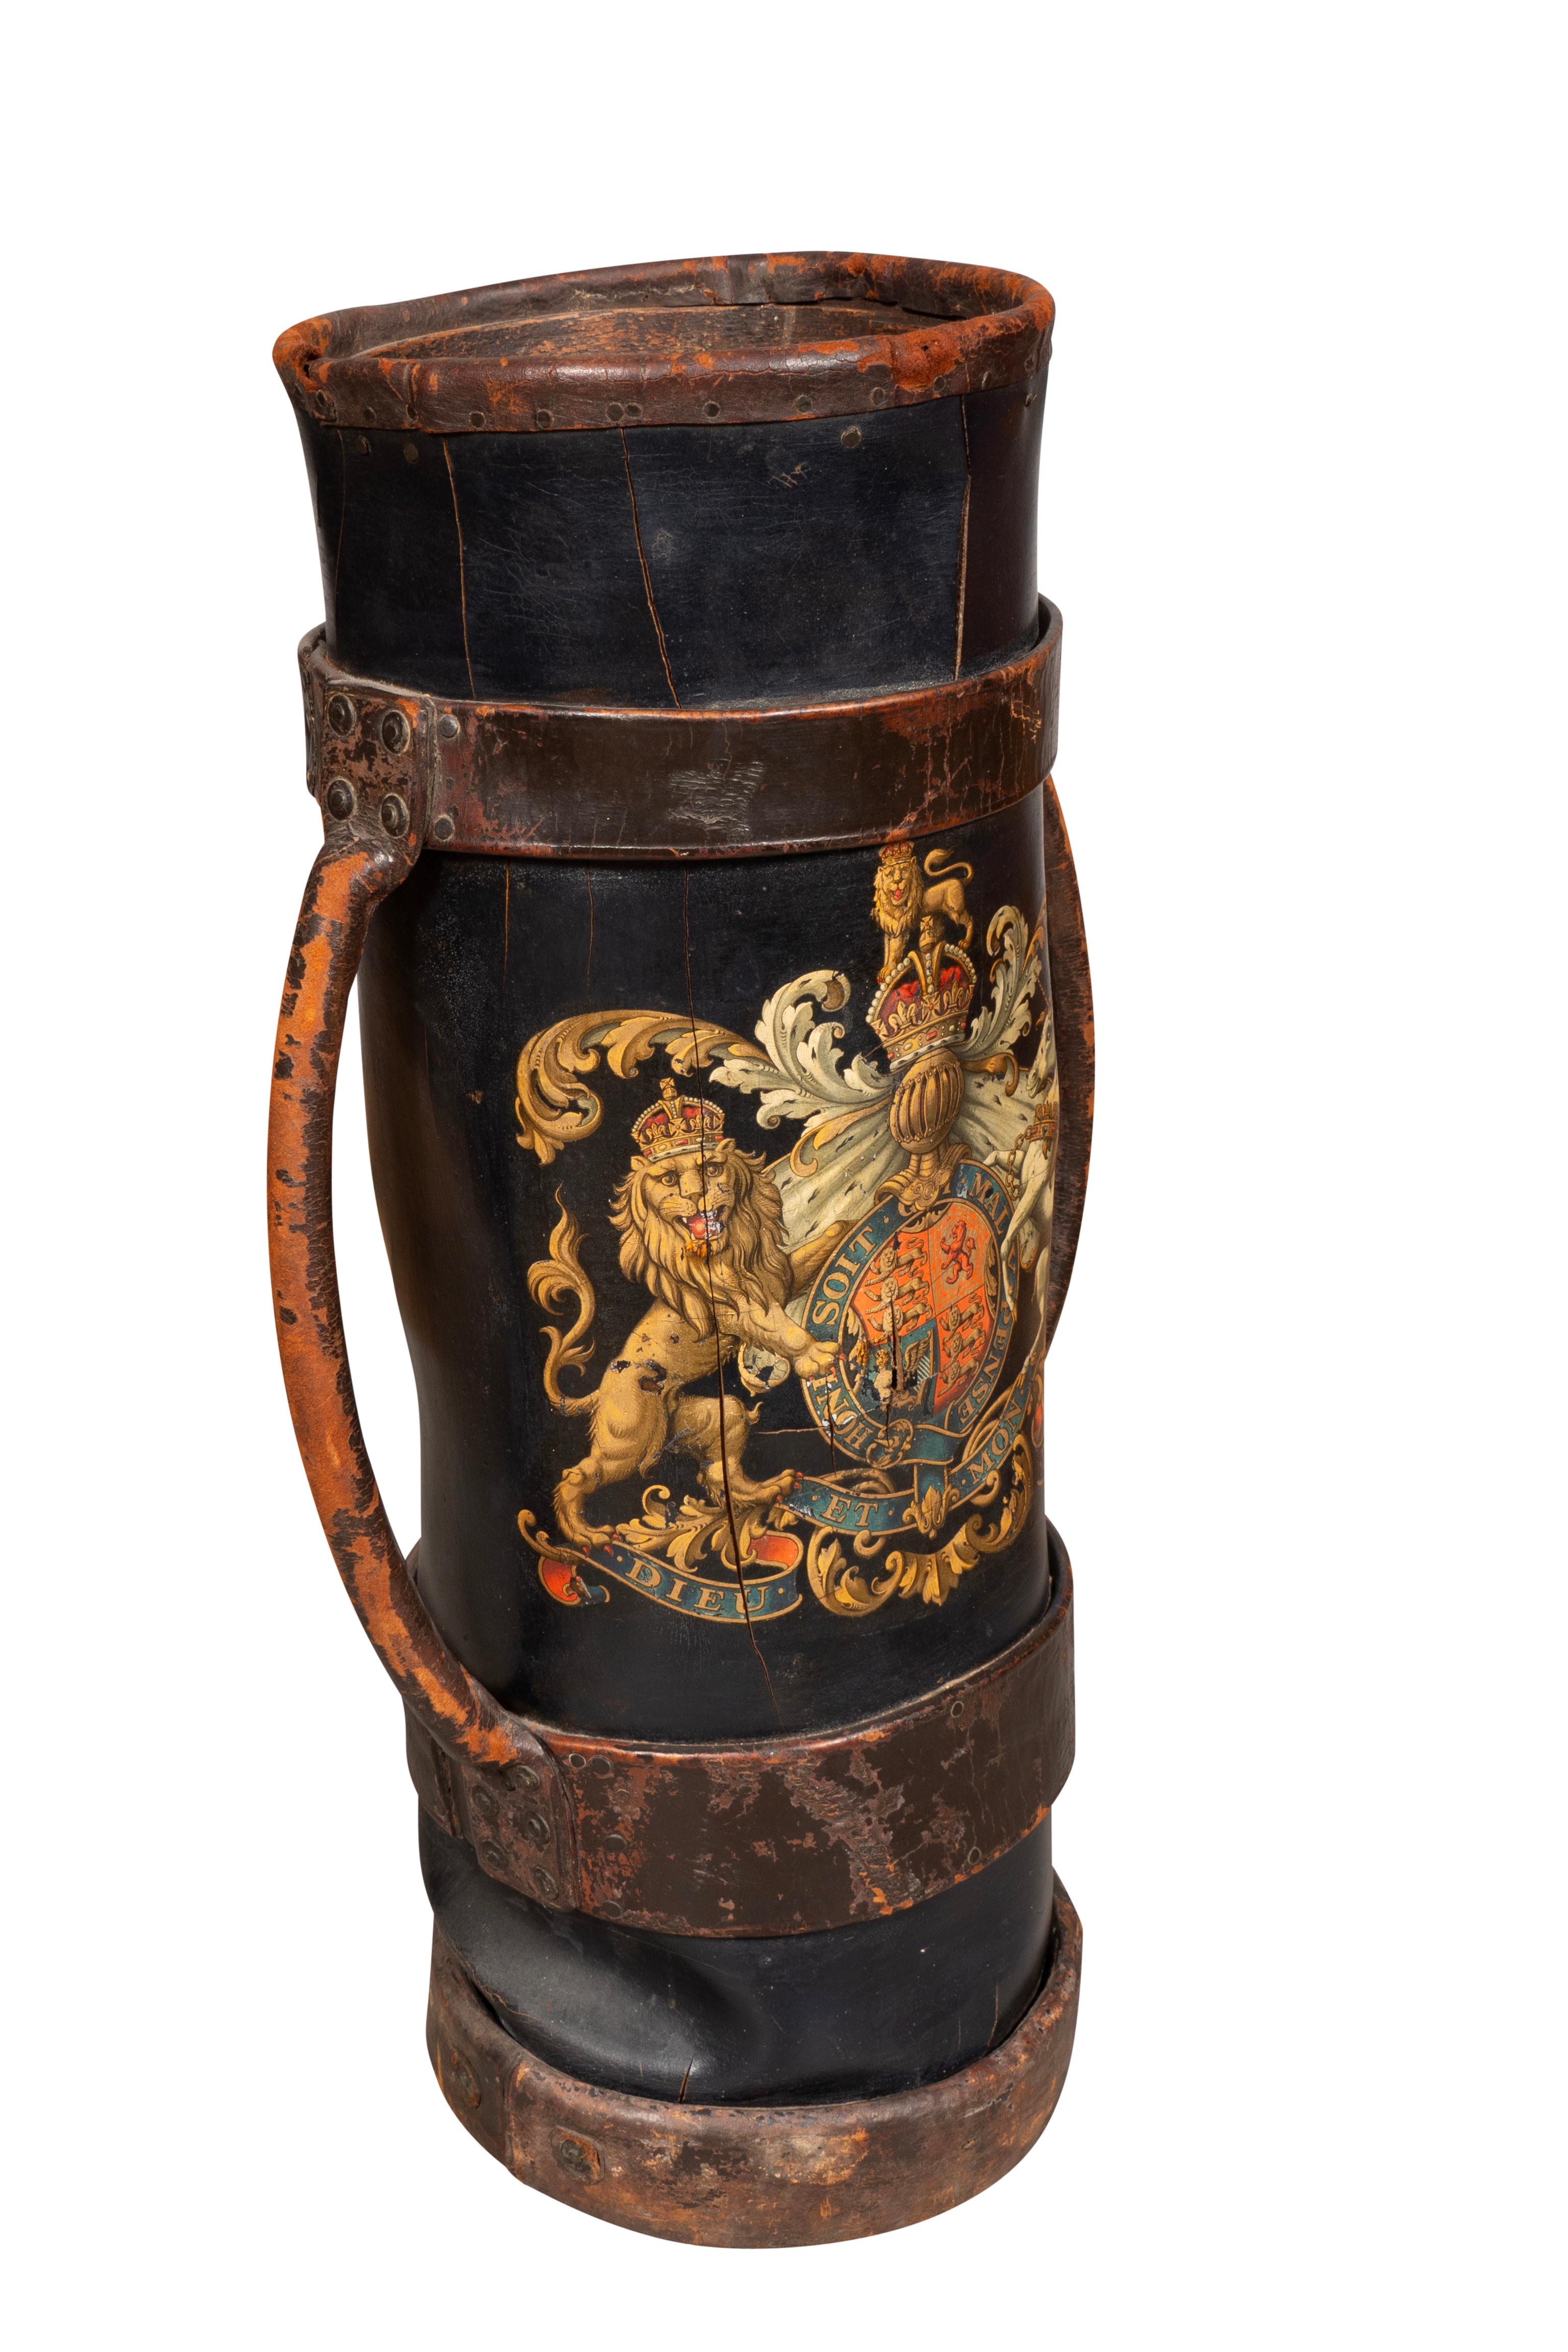 Cylindrical with two handles and a painted coat of arms.